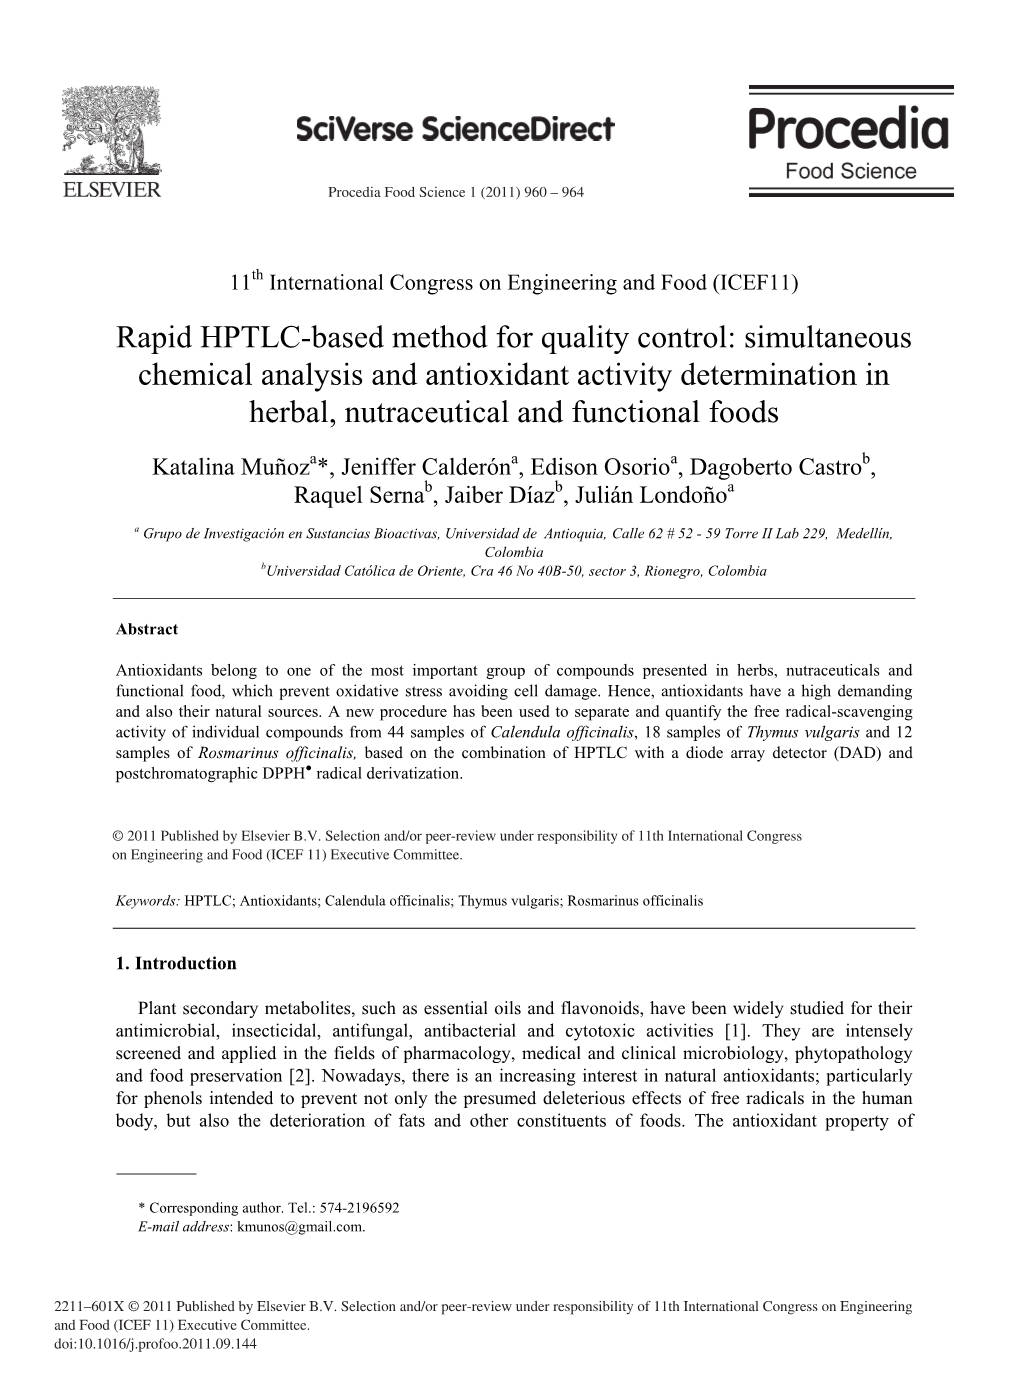 Simultaneous Chemical Analysis and Antioxidant Activity Determination in Herbal, Nutraceutical and Functional Foods